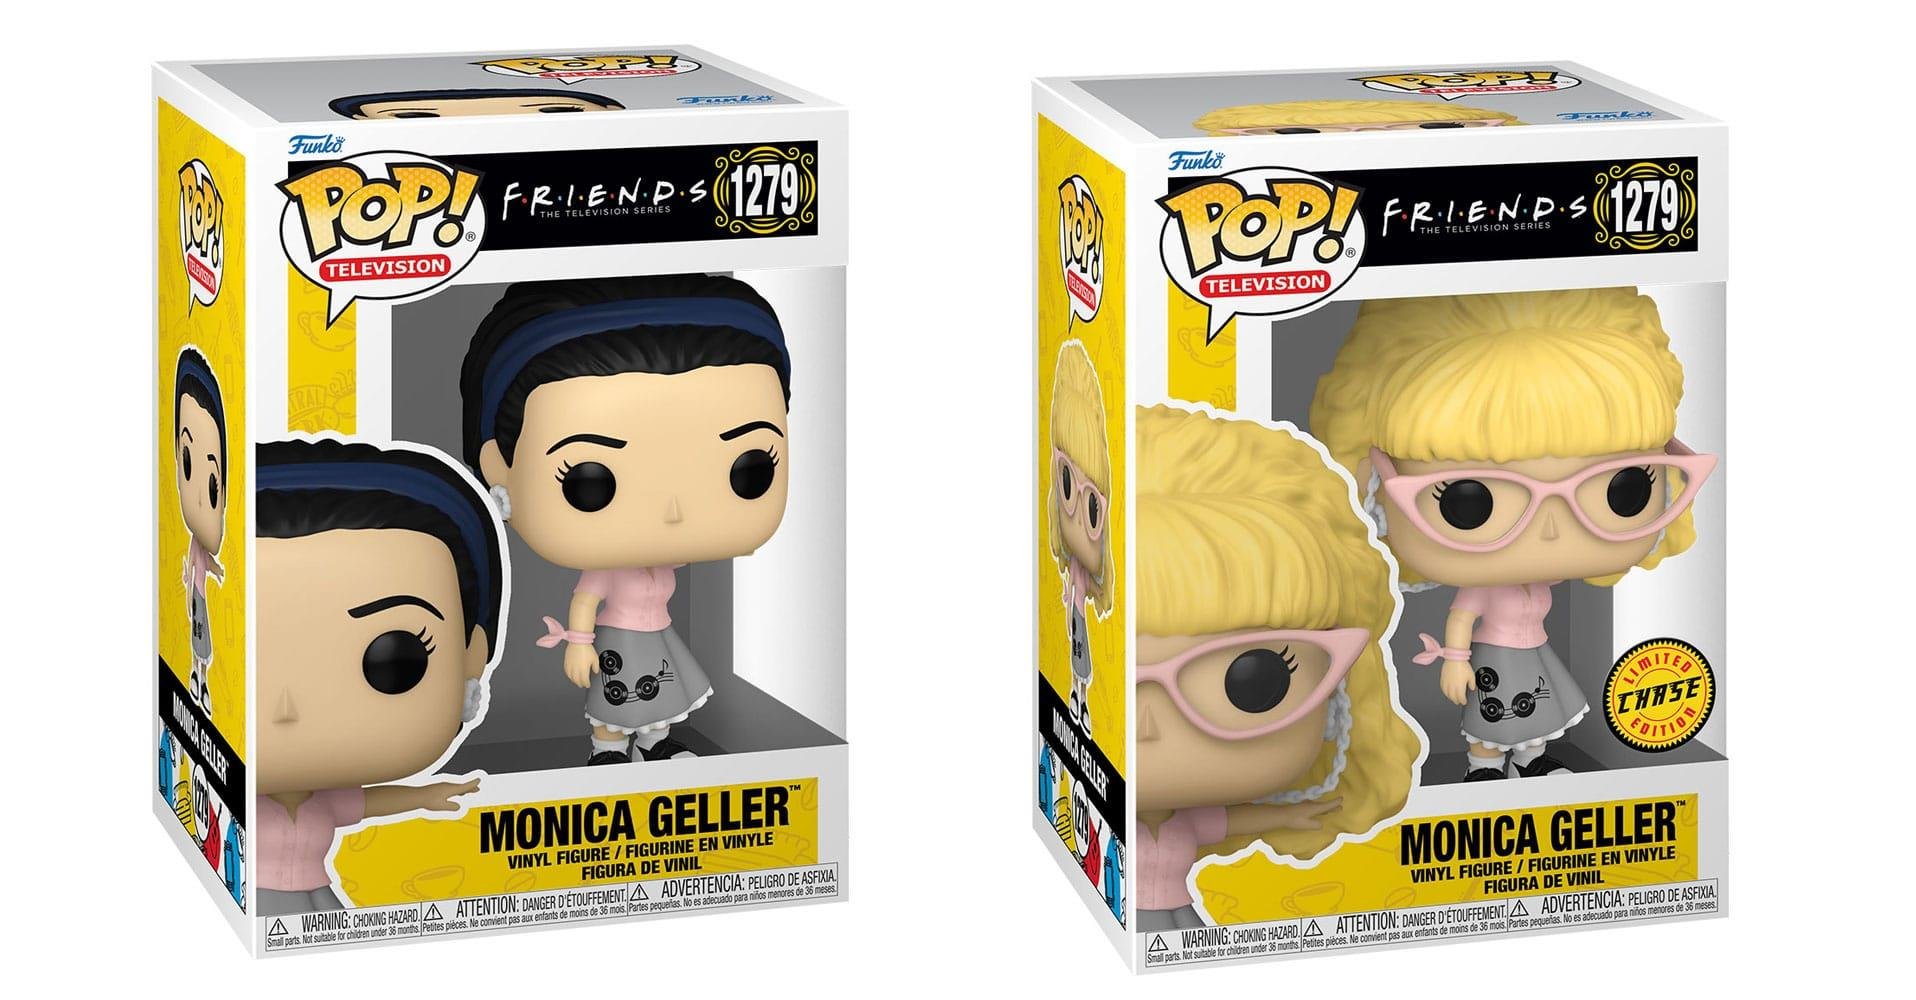 Funko POP! Friends Bundle (Chase Included)